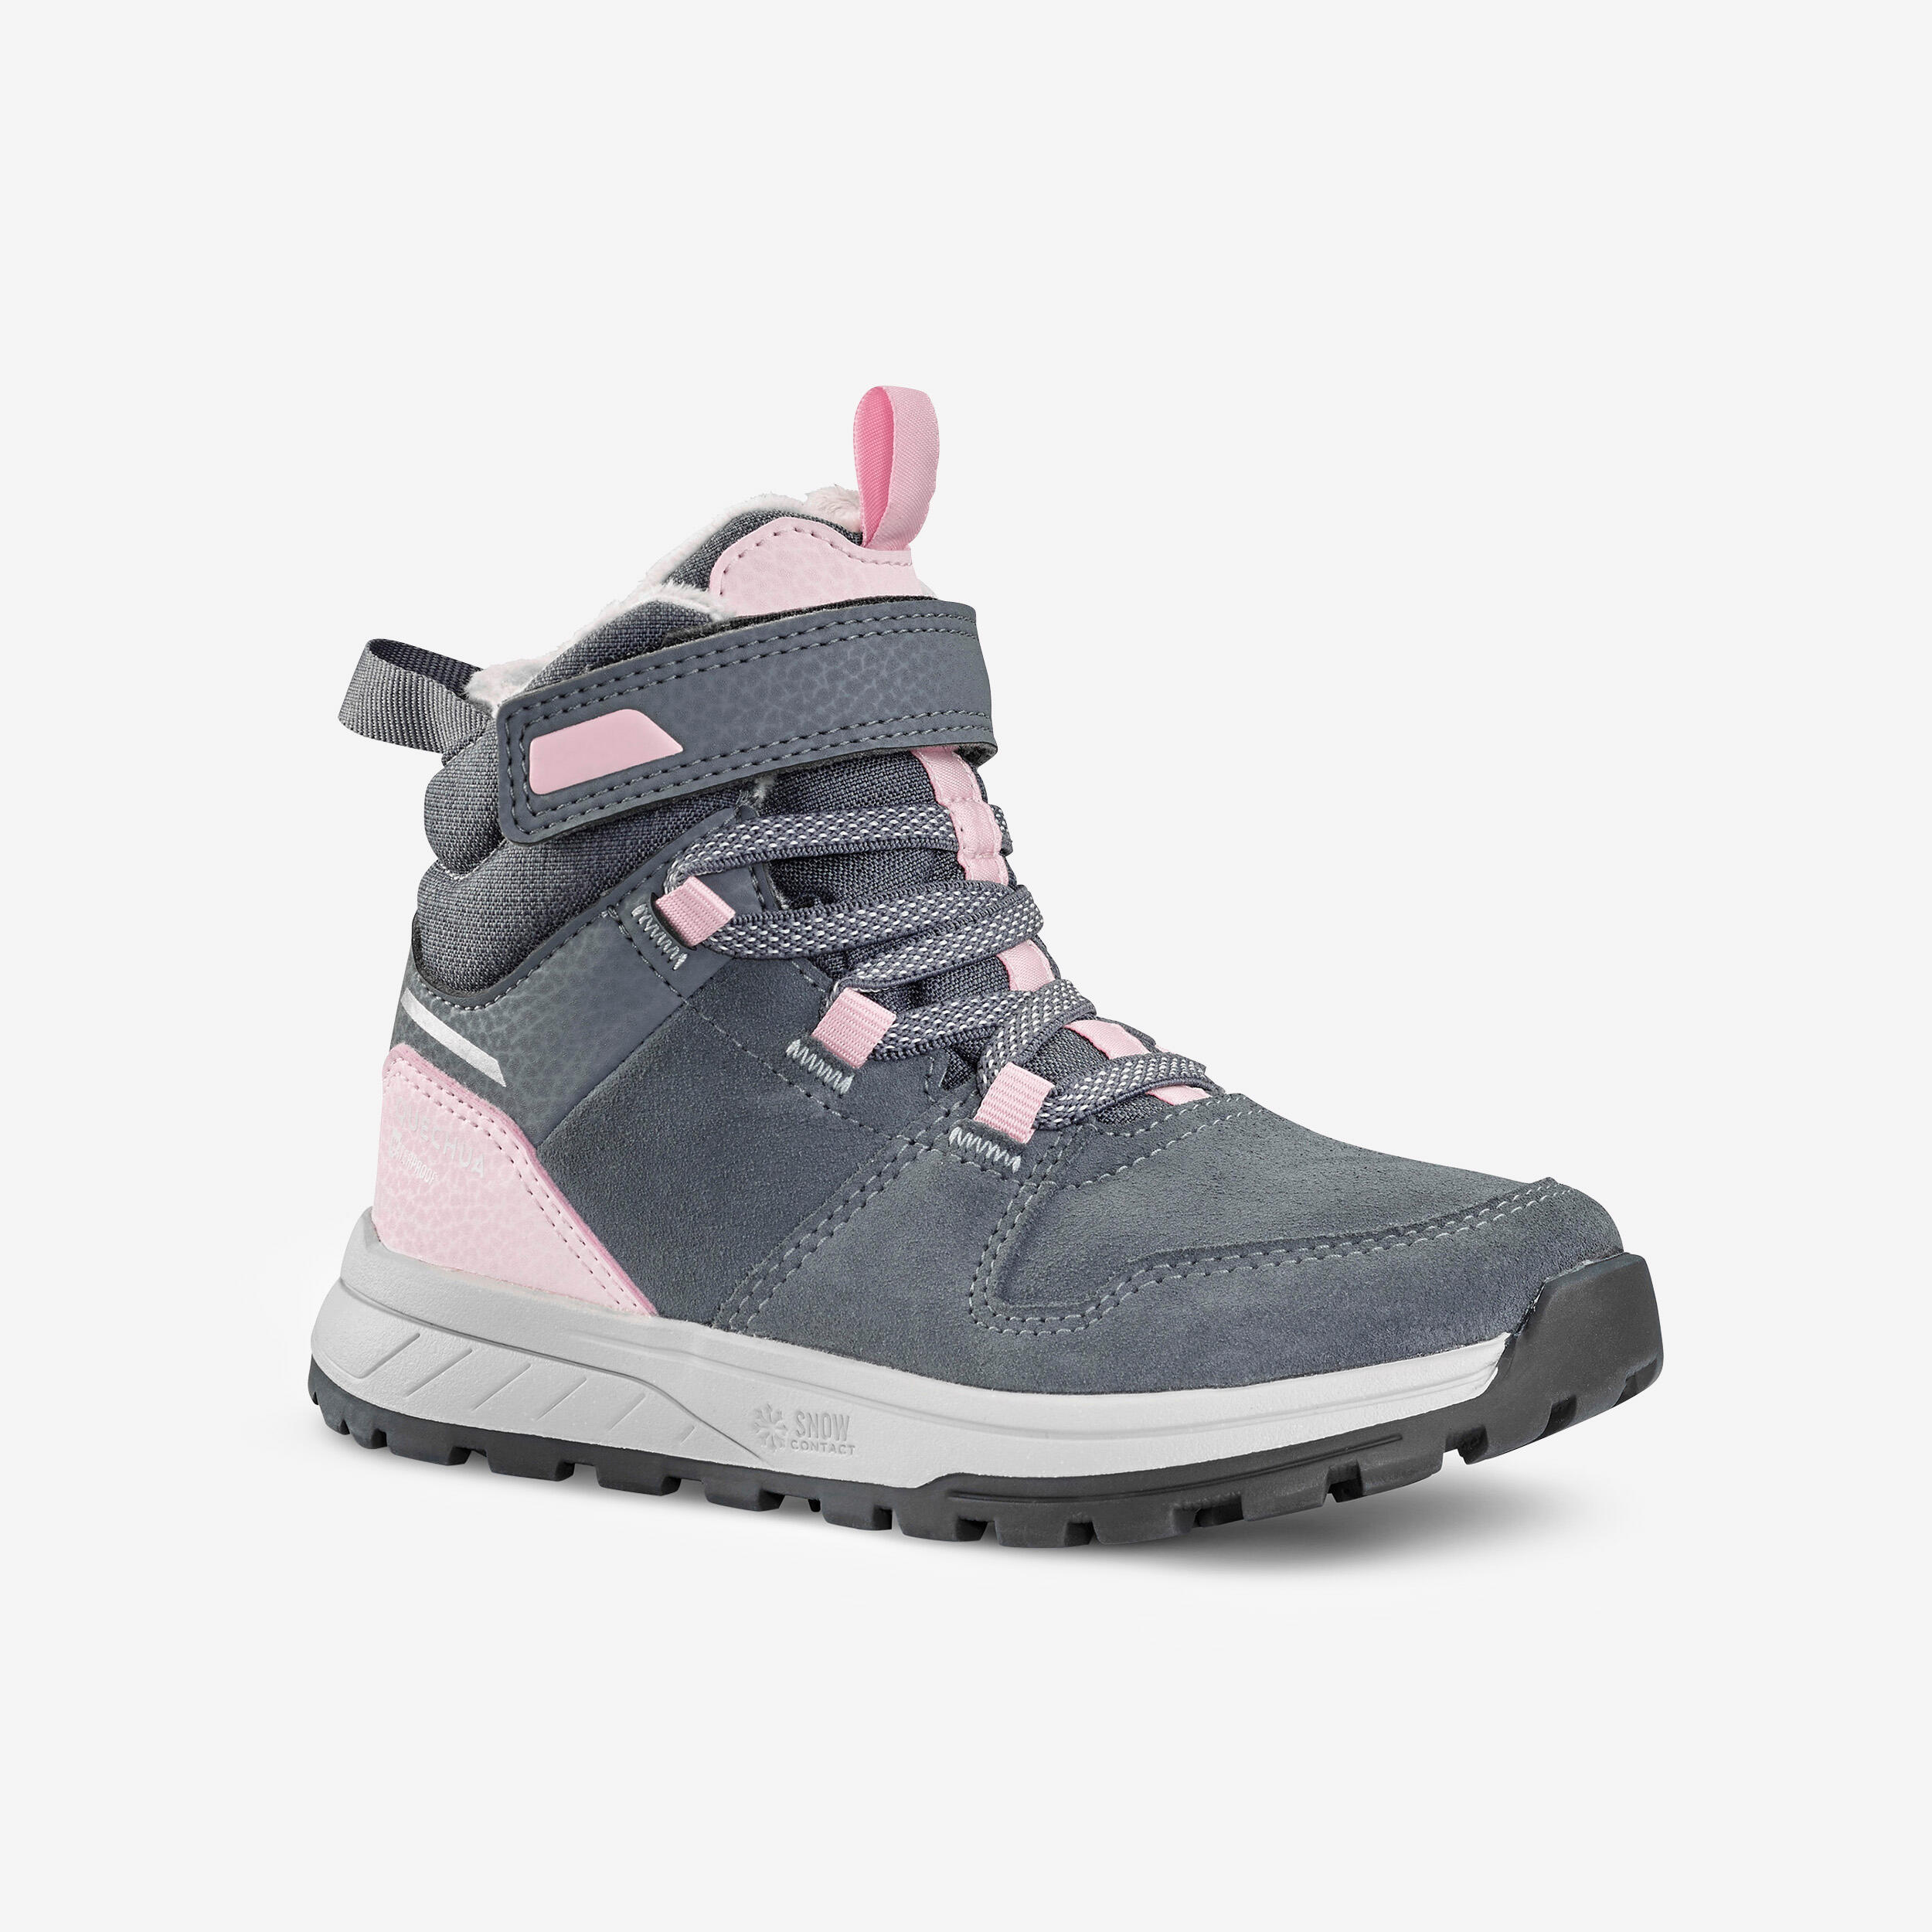 Image of Kids’ Winter Boots - SH 500